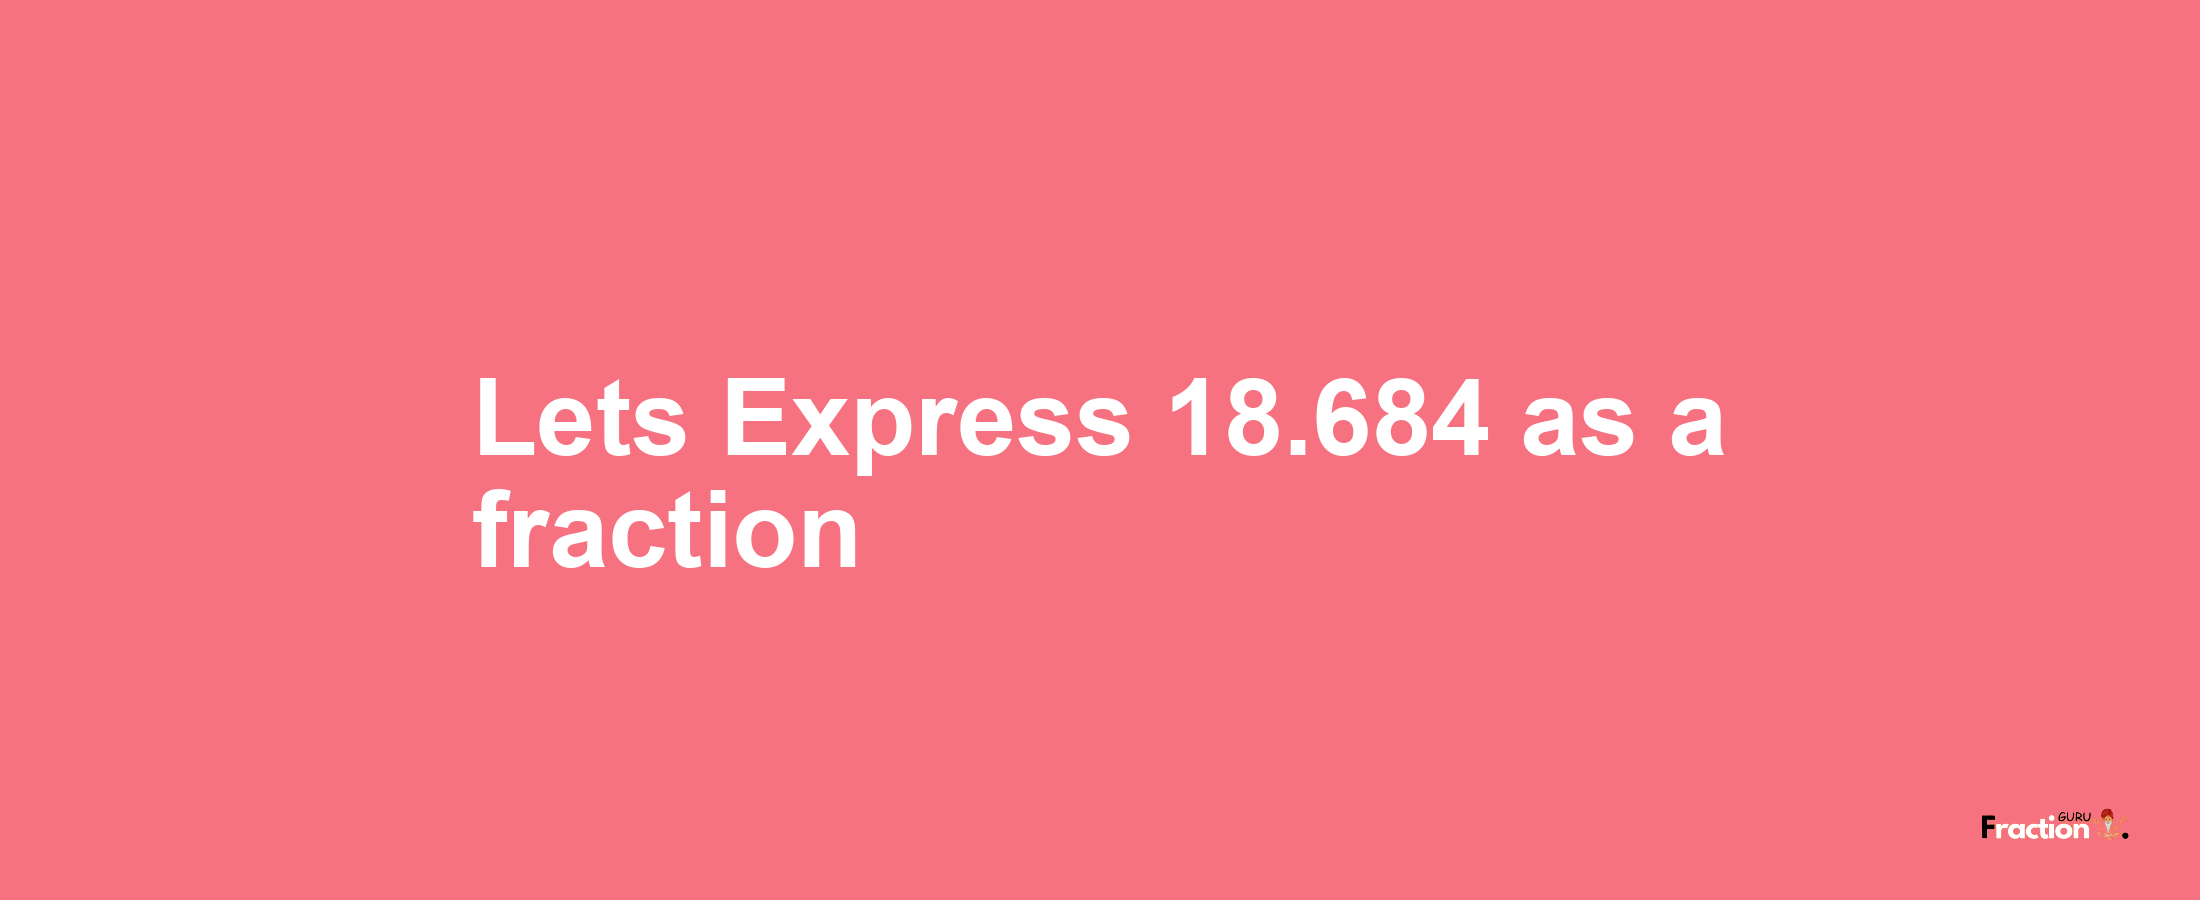 Lets Express 18.684 as afraction